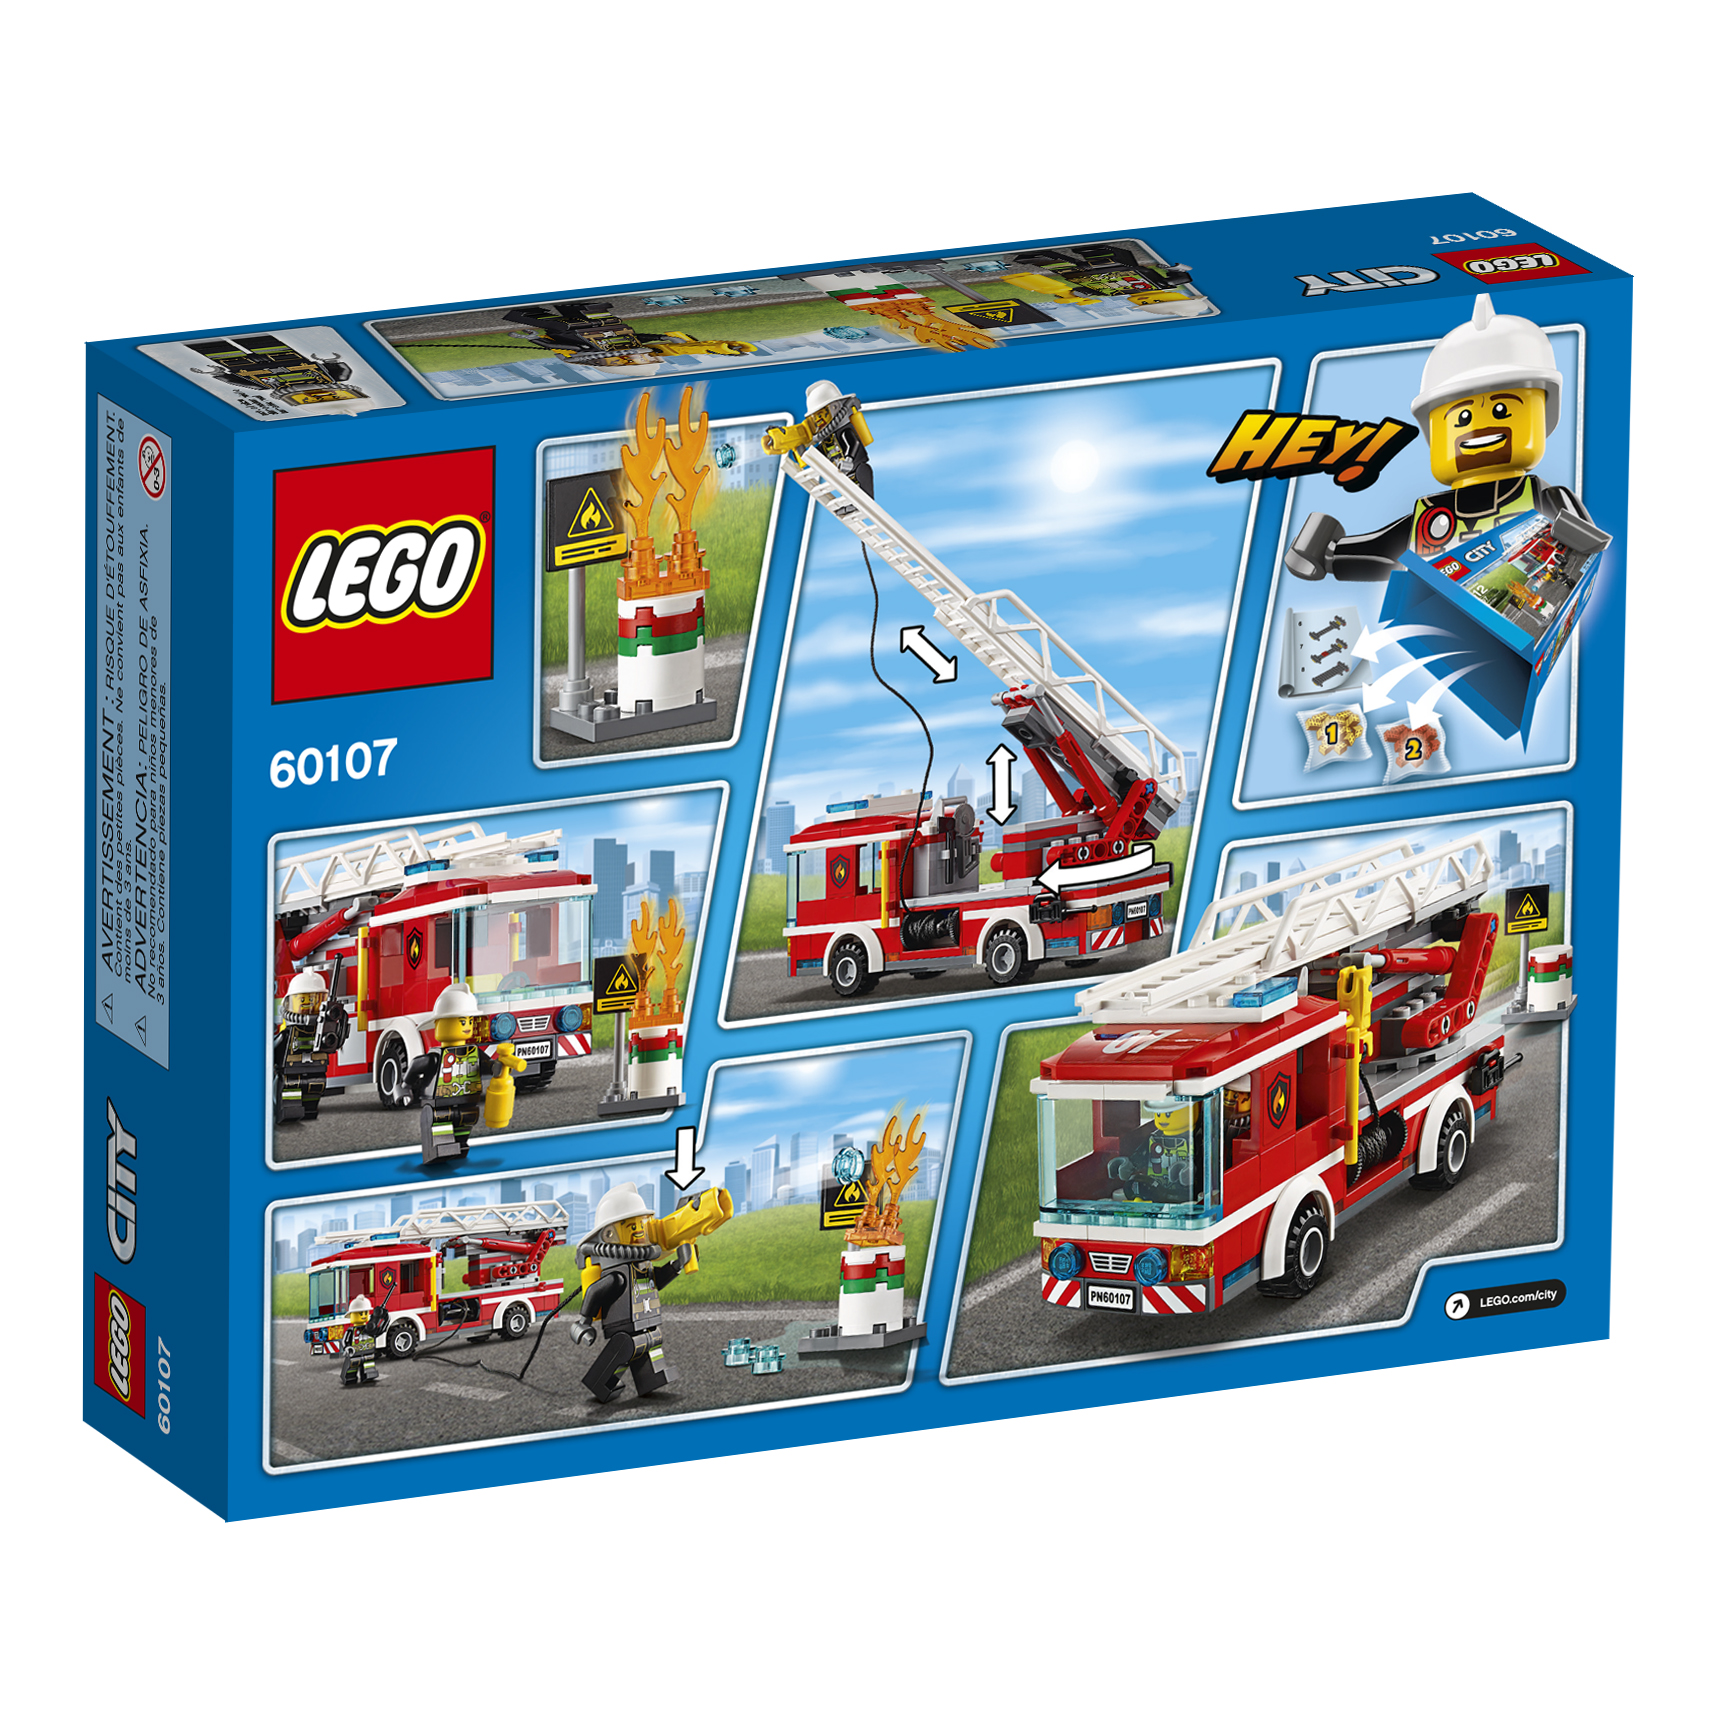 LEGO City Fire Fire Ladder Truck 60107 - image 4 of 4